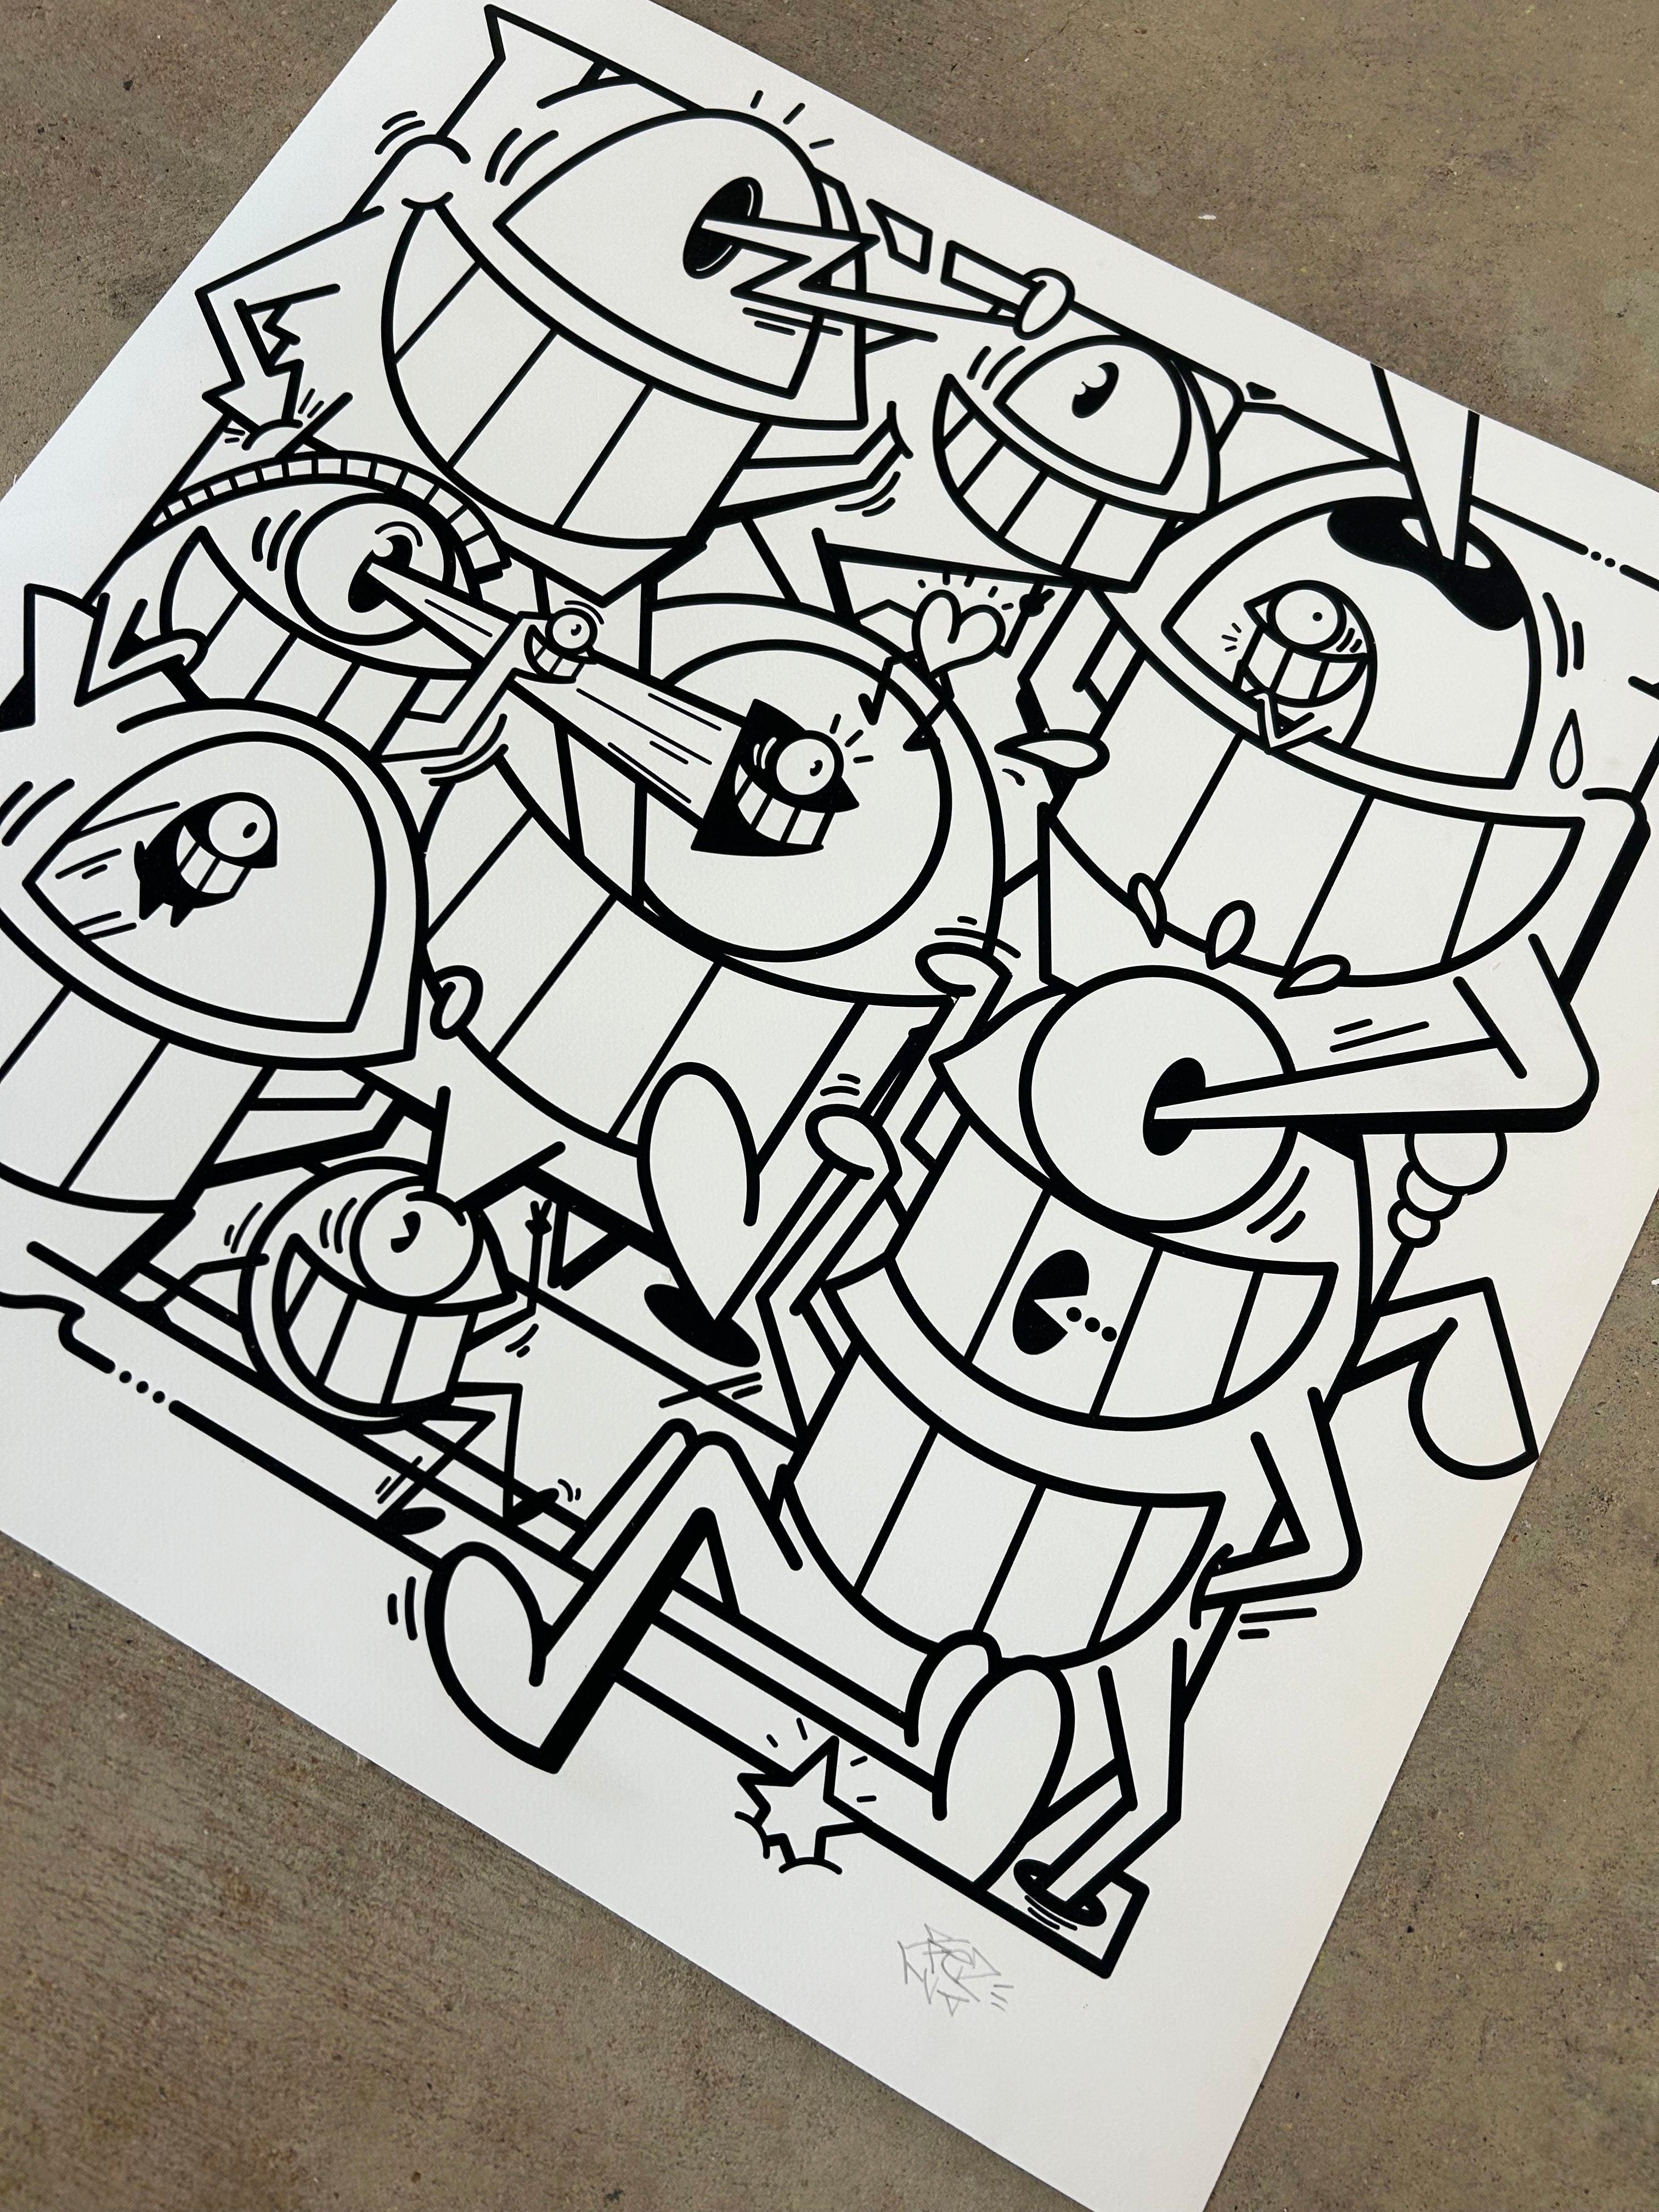 EL PEZ - SMILES IN STYLE MONO - ed 15 with free mini screen print for colouring in